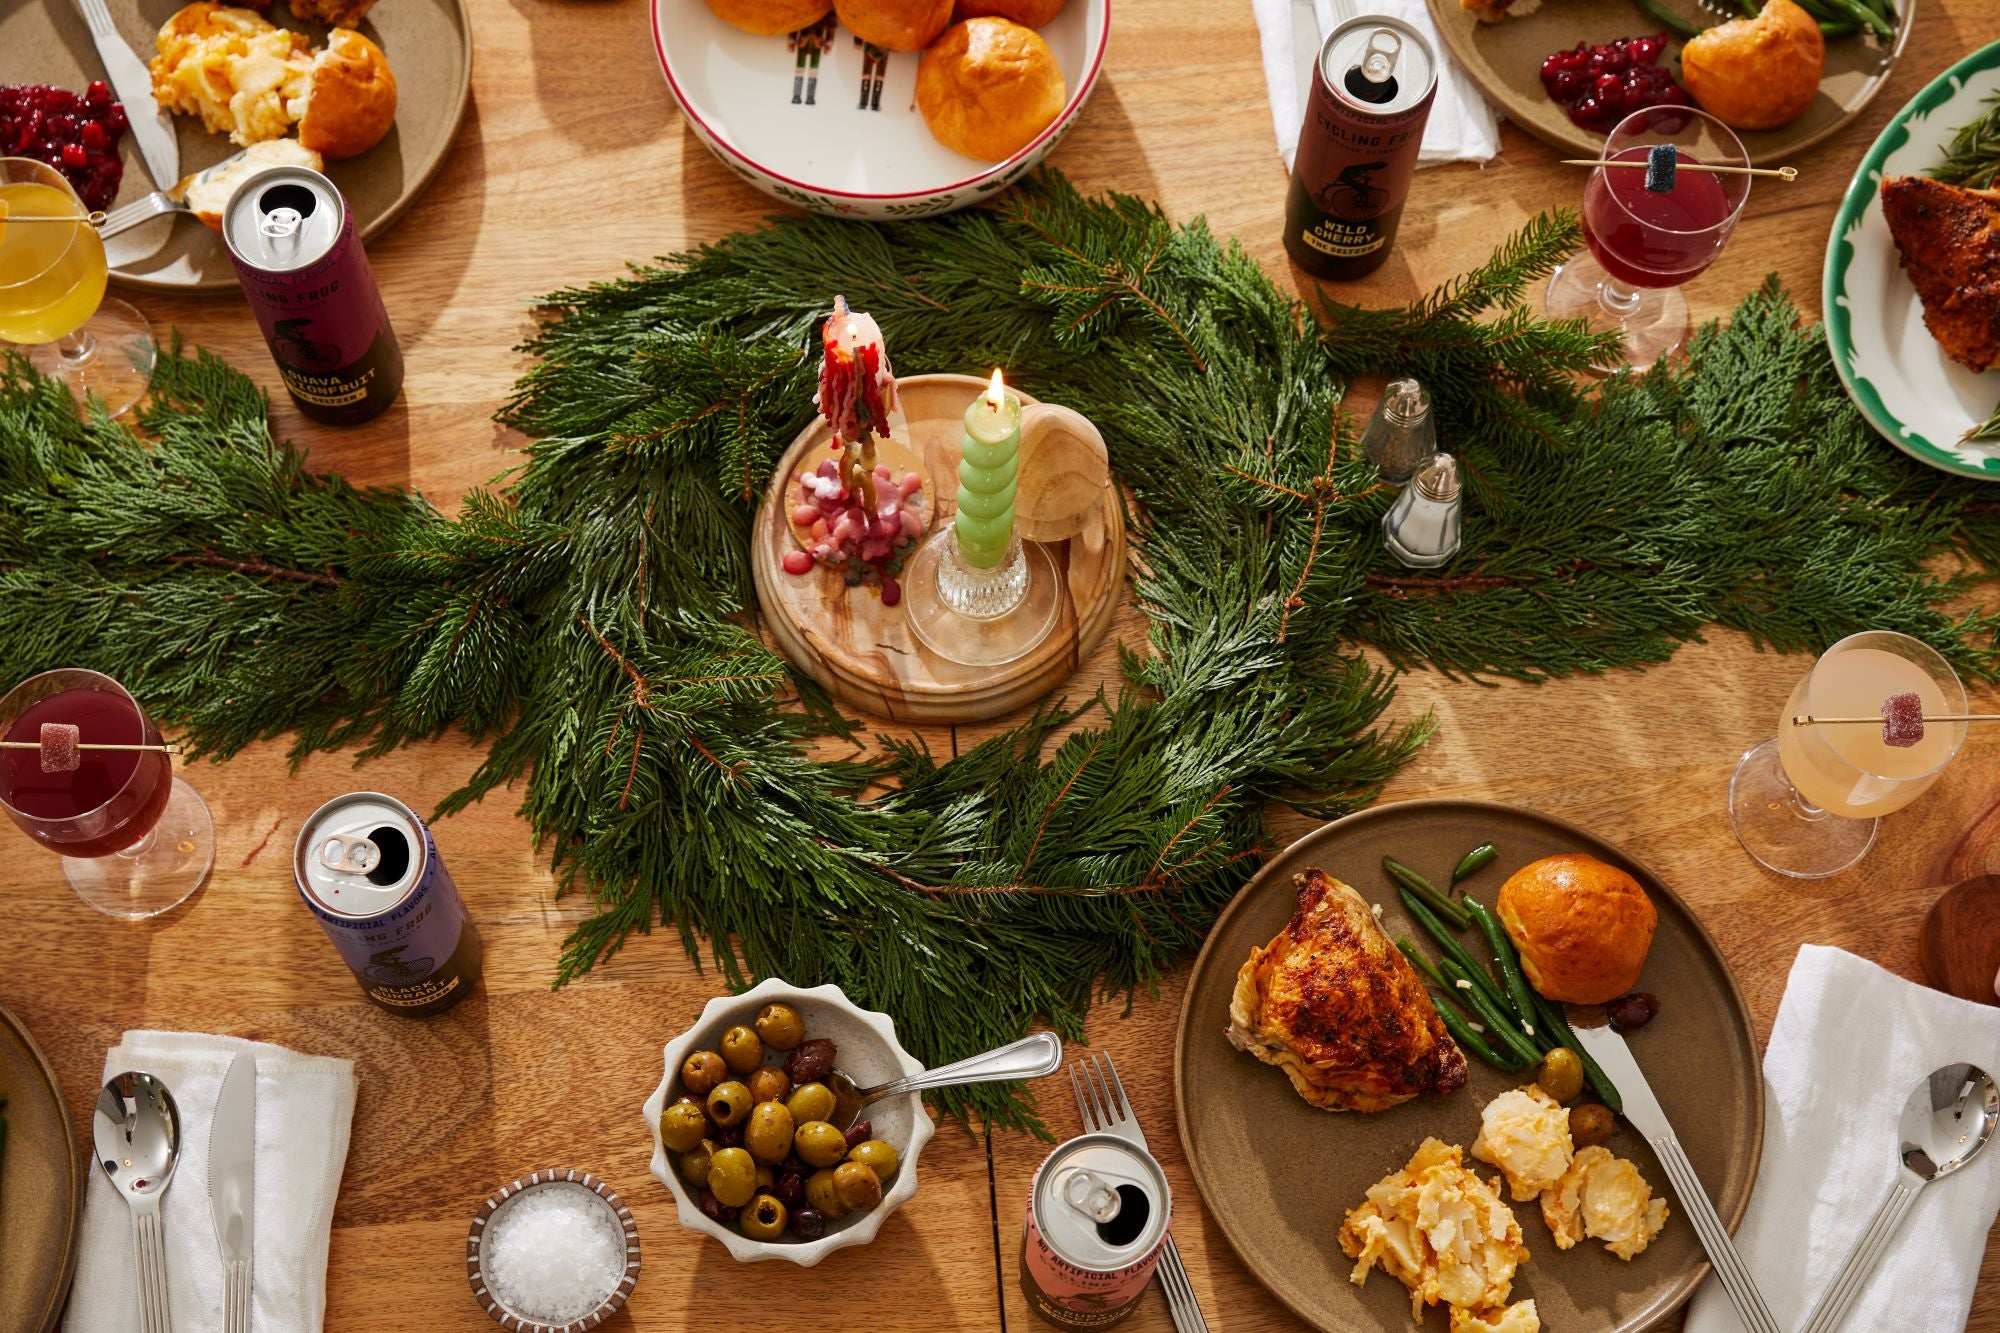 Weed and the Holidays: Normalizing Cannabis at Seasonal Get-Togethers